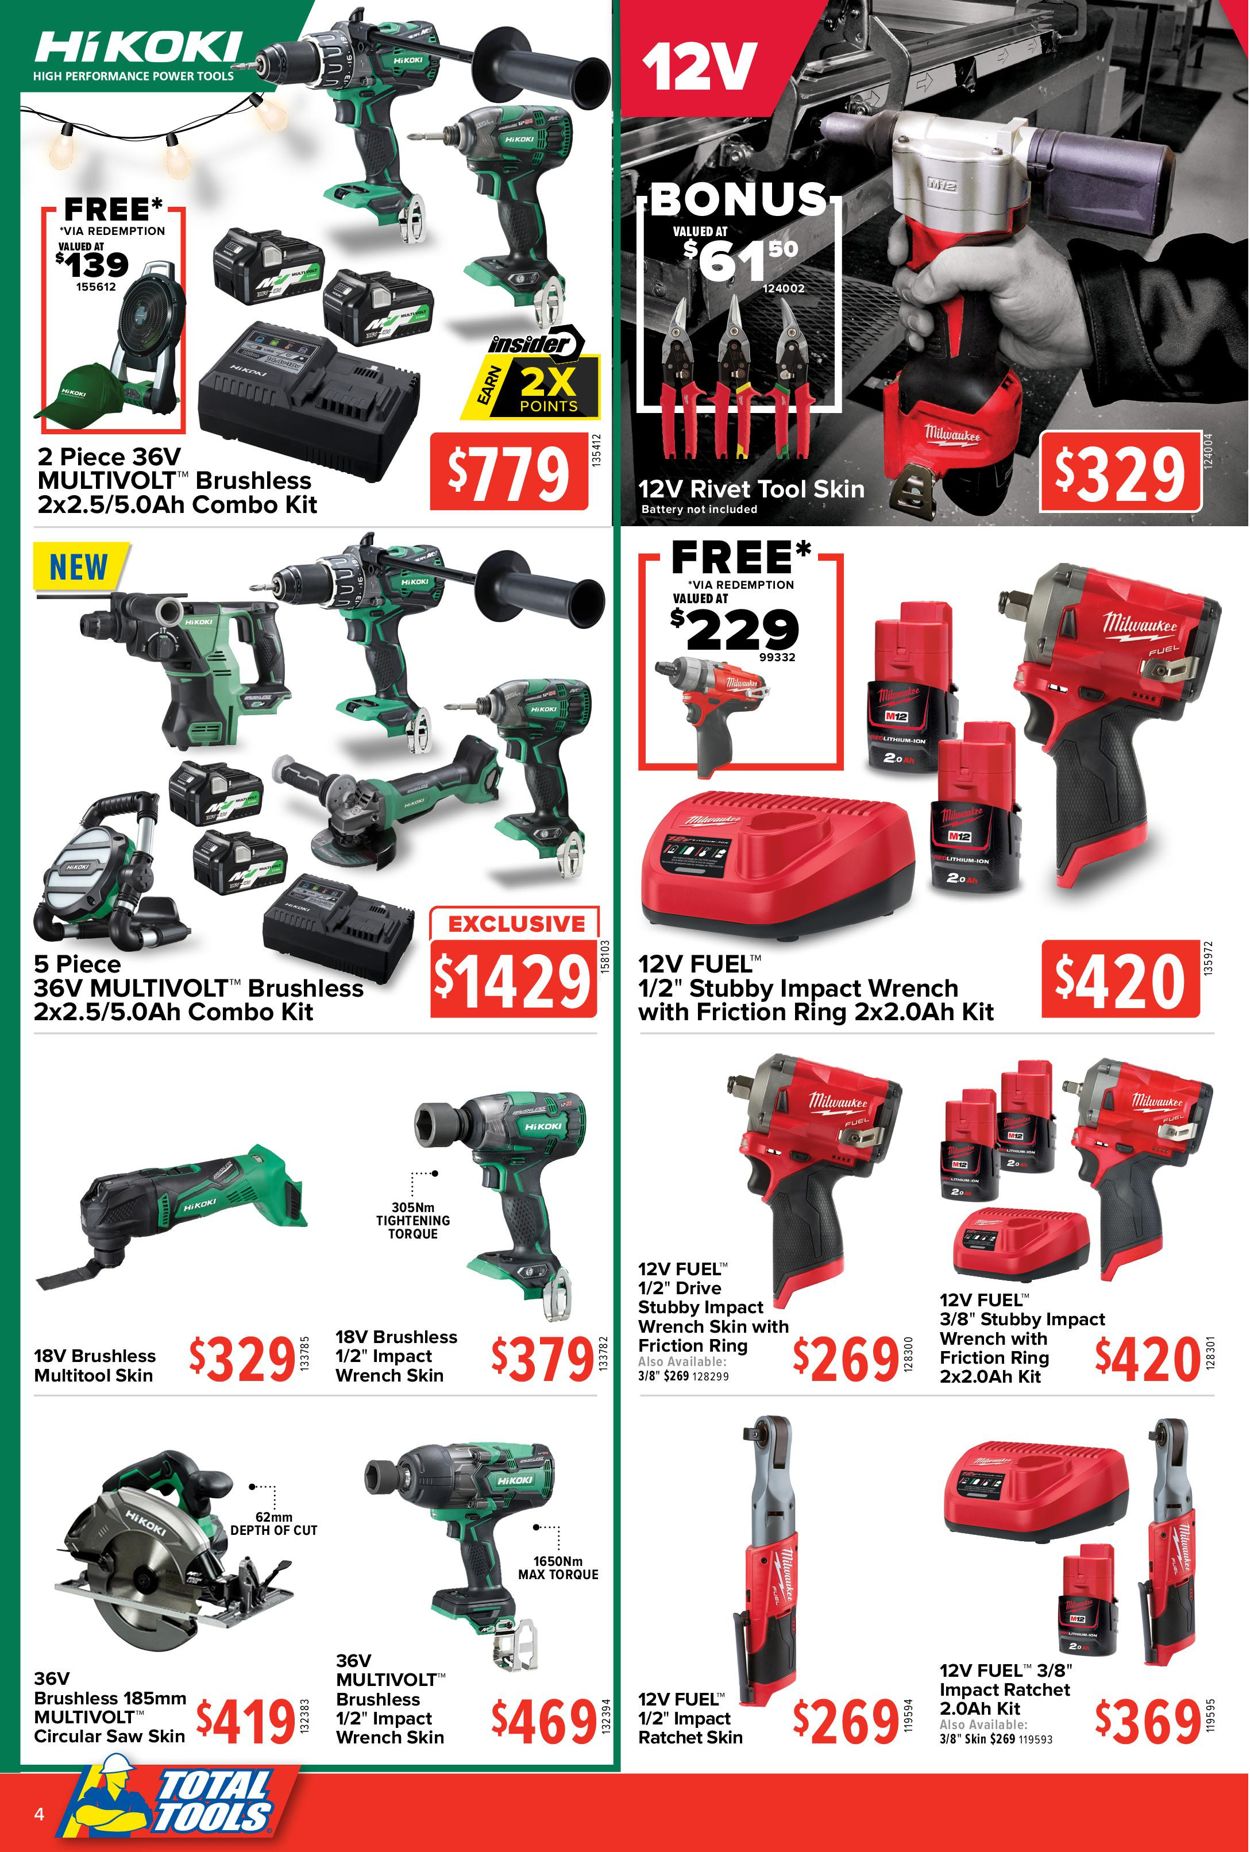 Total Tools Catalogue from 30/11/2020